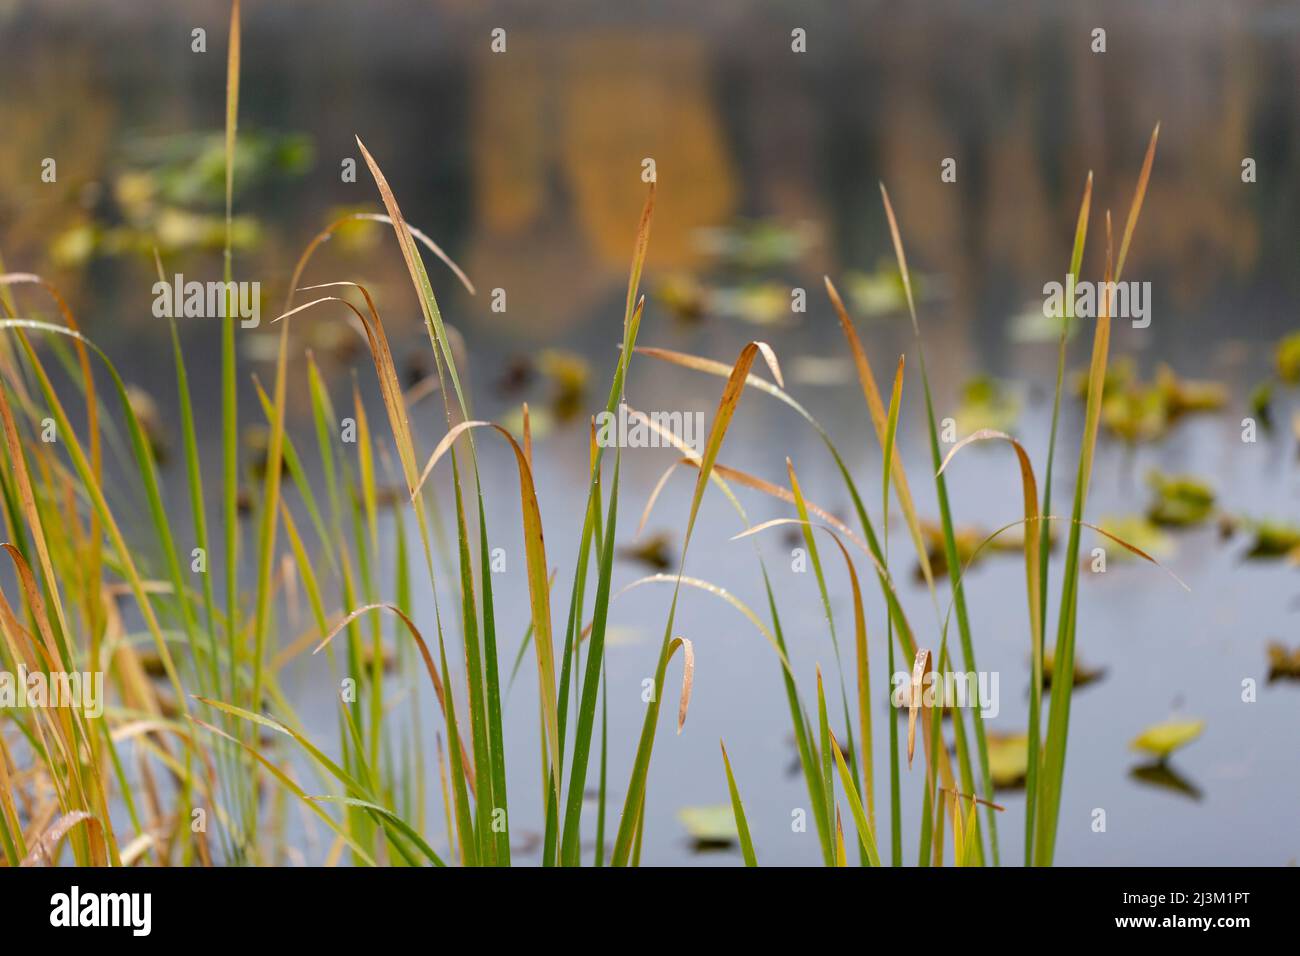 Close-up detail of blades of grass turning into autumn colours in the foreground and a lake with aquatic plants in the background Stock Photo